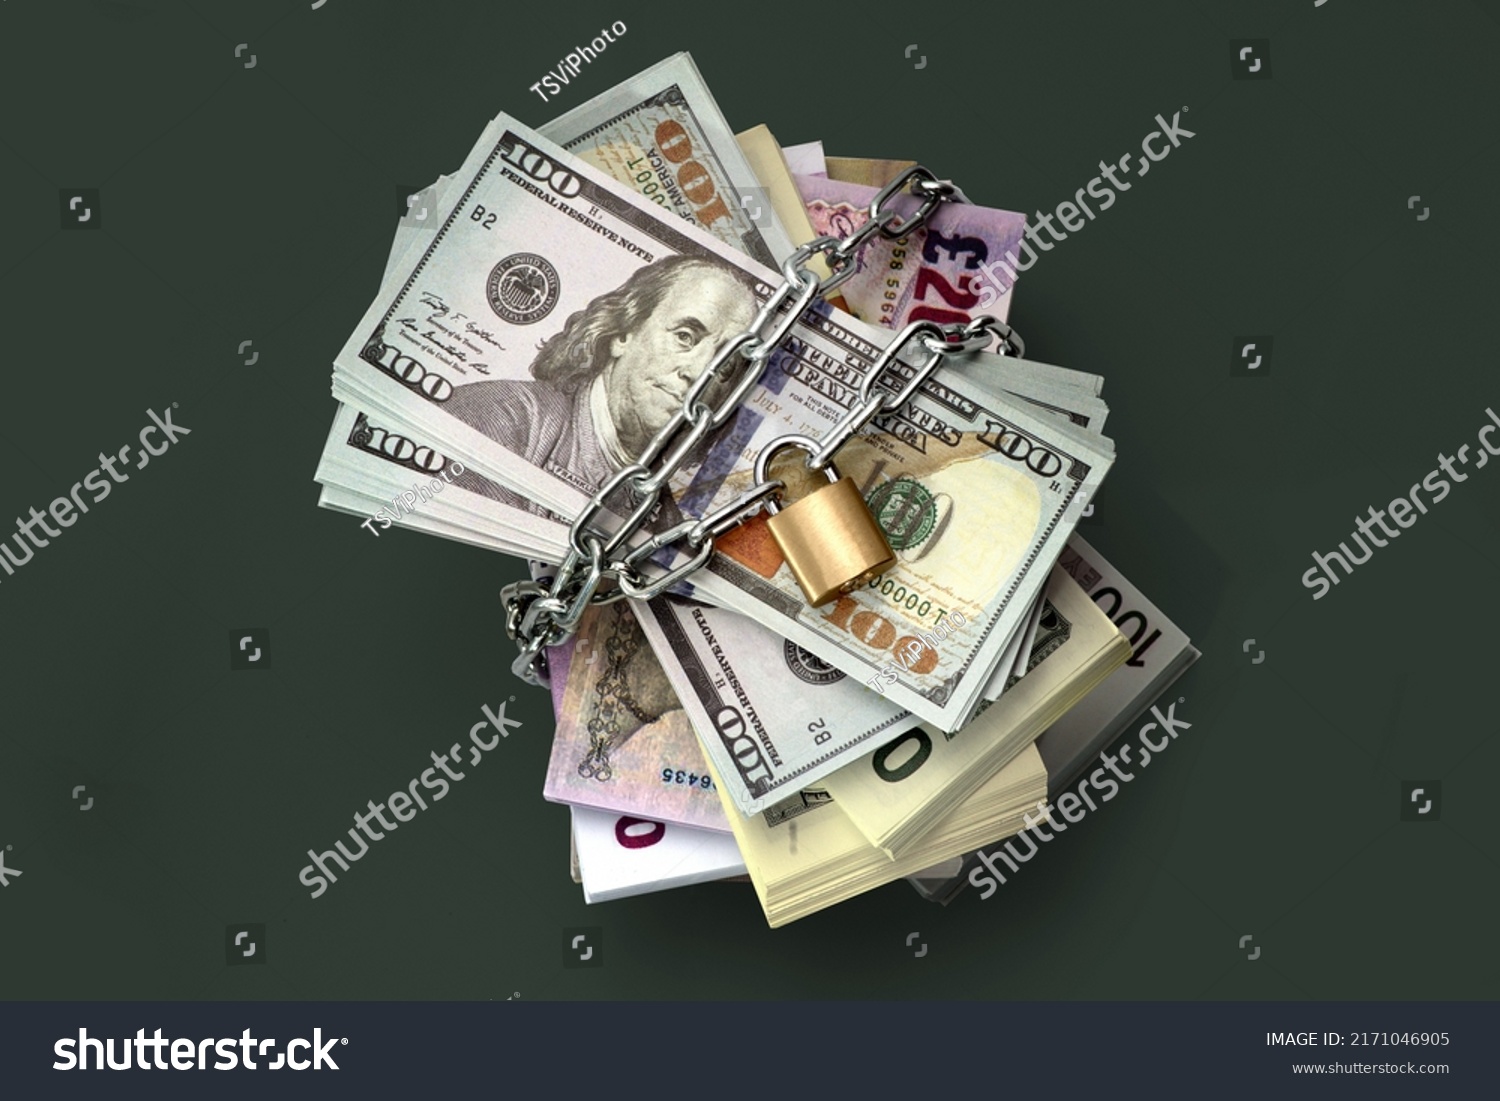 Dollars and banknotes of different countries are locked and chained in the background. Monetary crisis, financial problems, sanctions, default. The concept is the up-to-date relevant situation #2171046905